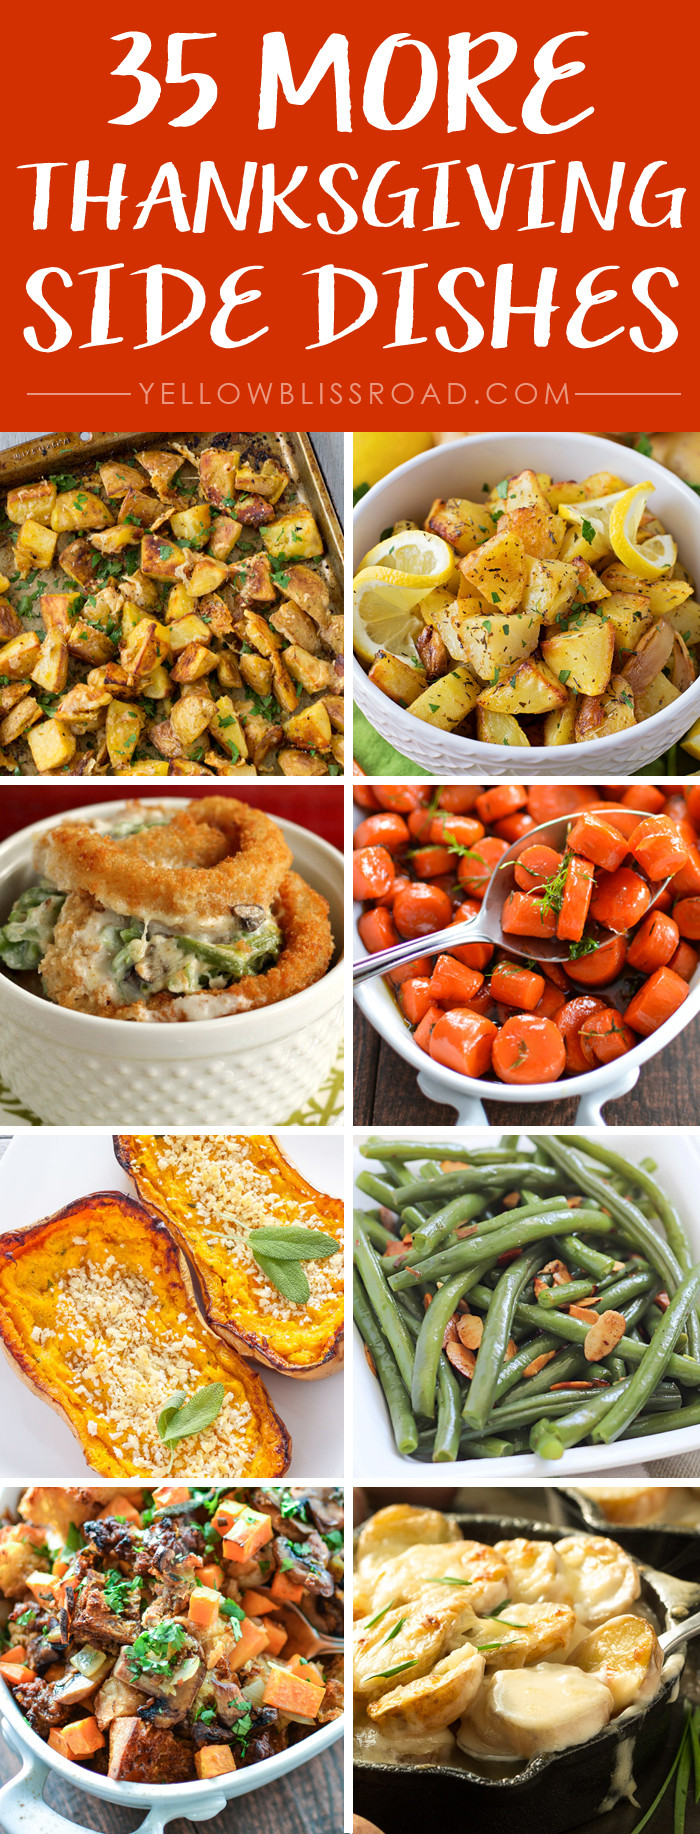 Side Dishes For Thanksgiving Turkey Dinner
 Twice Baked Potato Casserole with Potato Chip Crust